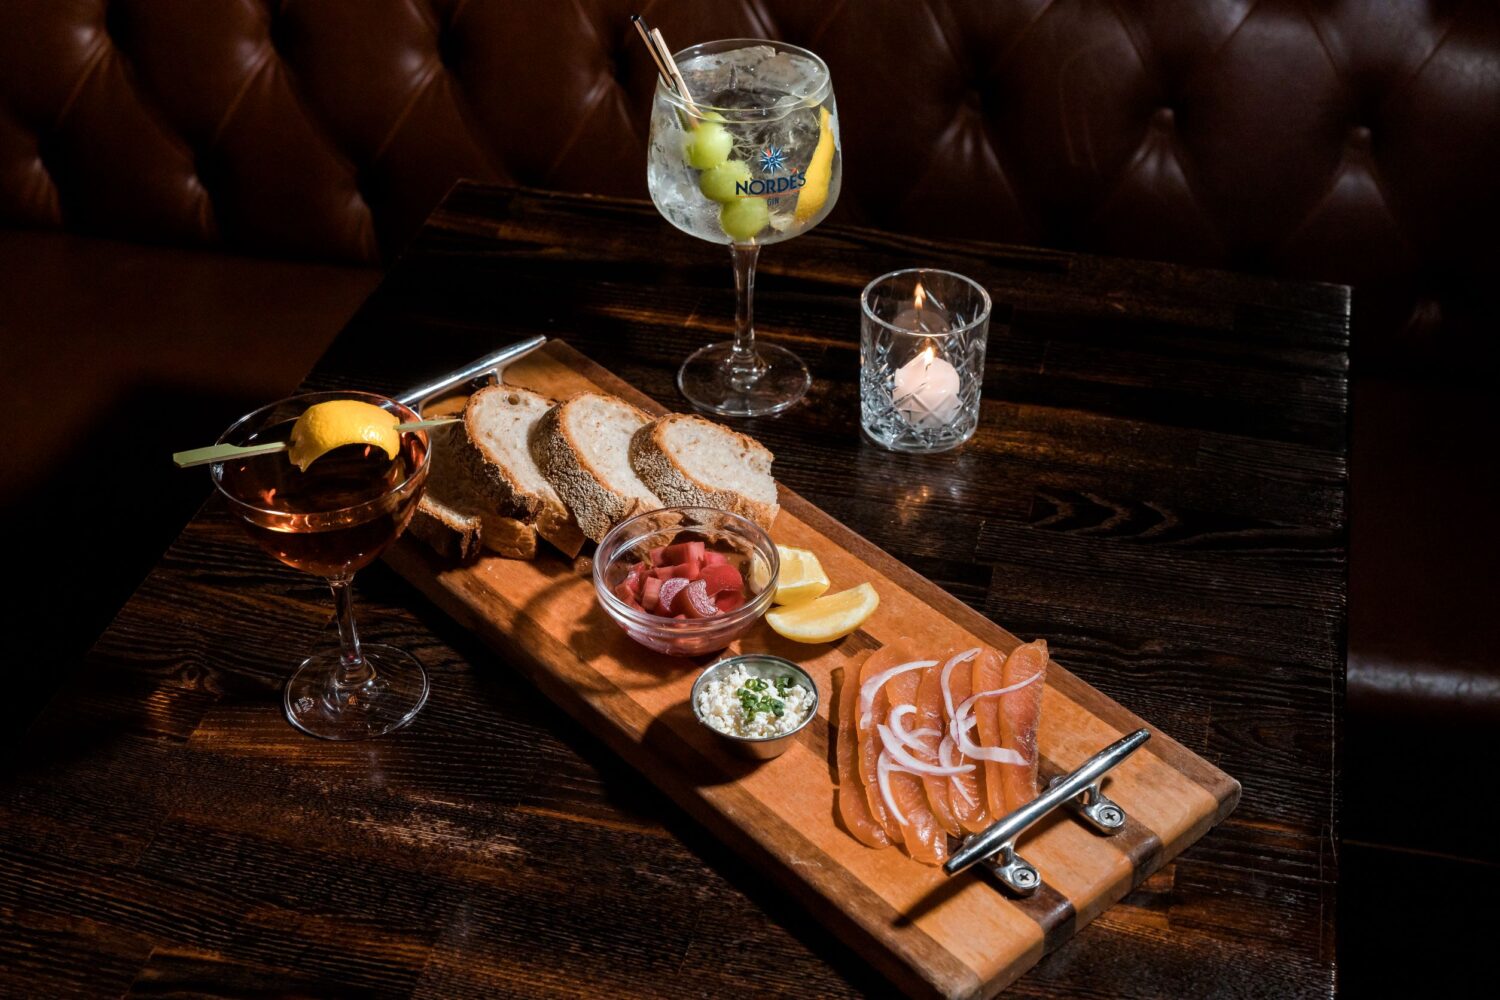 Snack Platter and Gin Tonic at The GIn Commission